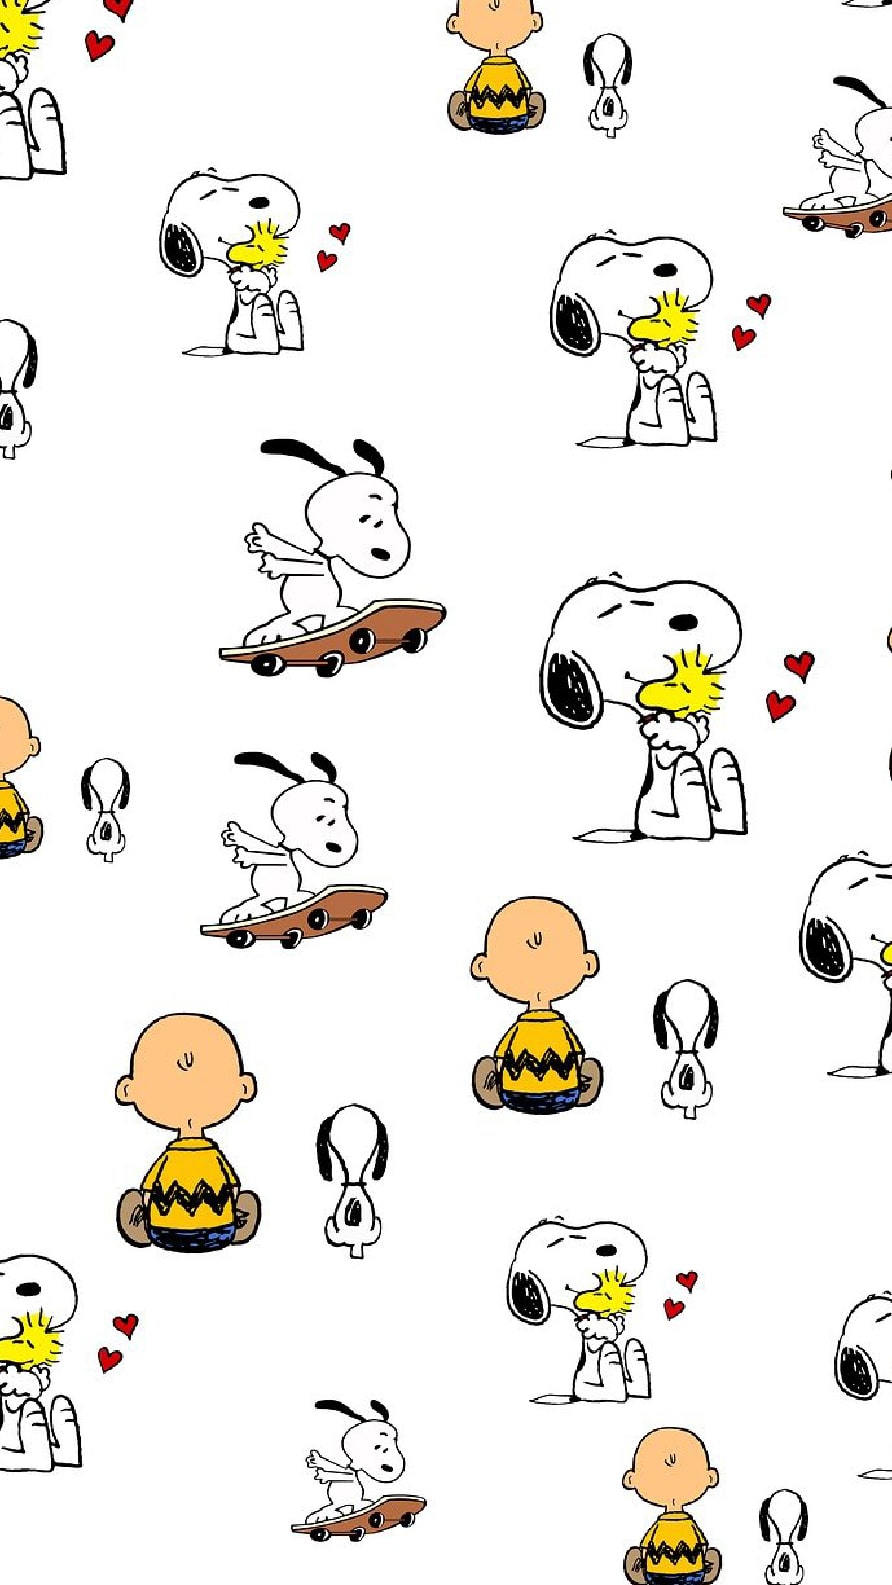 iPhone wallpapers featuring Snoopy